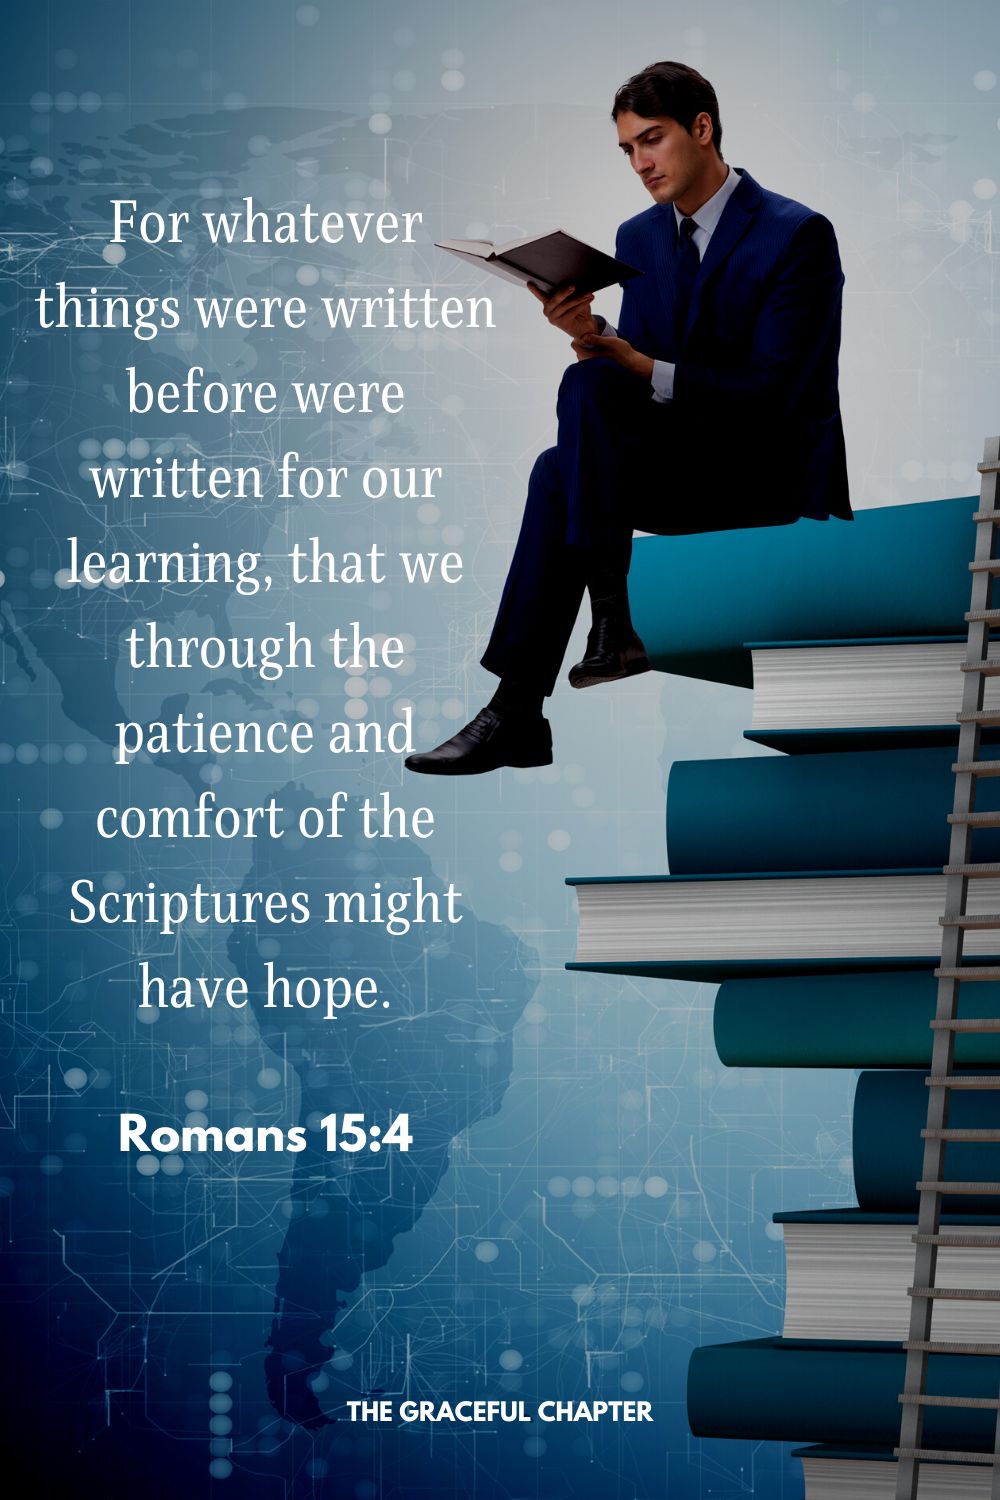 For whatever things were written before were written for our learning, that we through the patience and comfort of the Scriptures might have hope.Romans 15:4